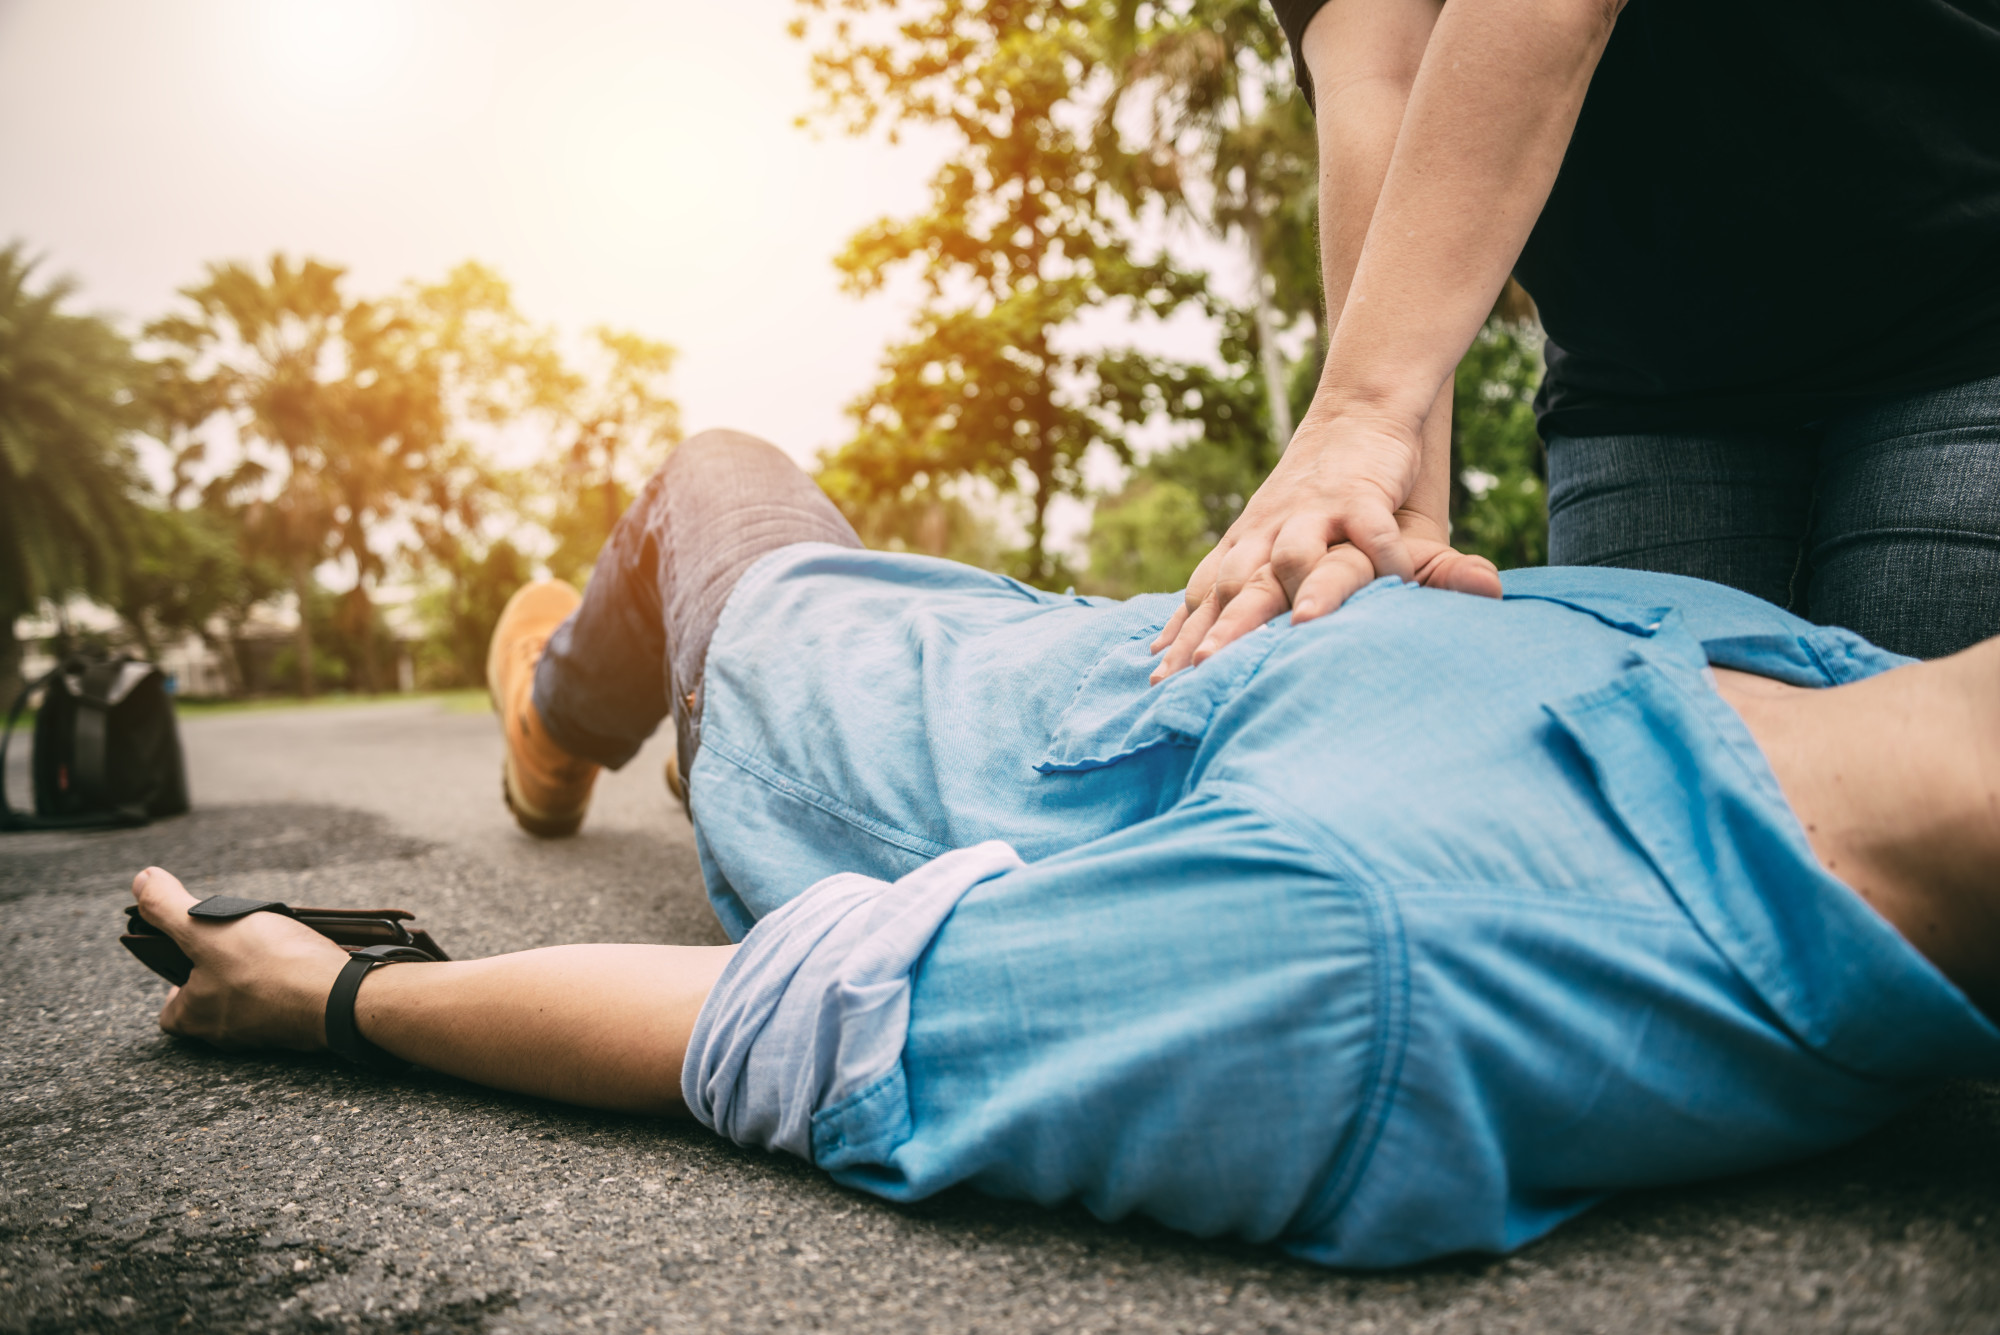 How much do you know about CPR? Have you ever asked yourself the question: what is high quality cpr? Read on to learn more.